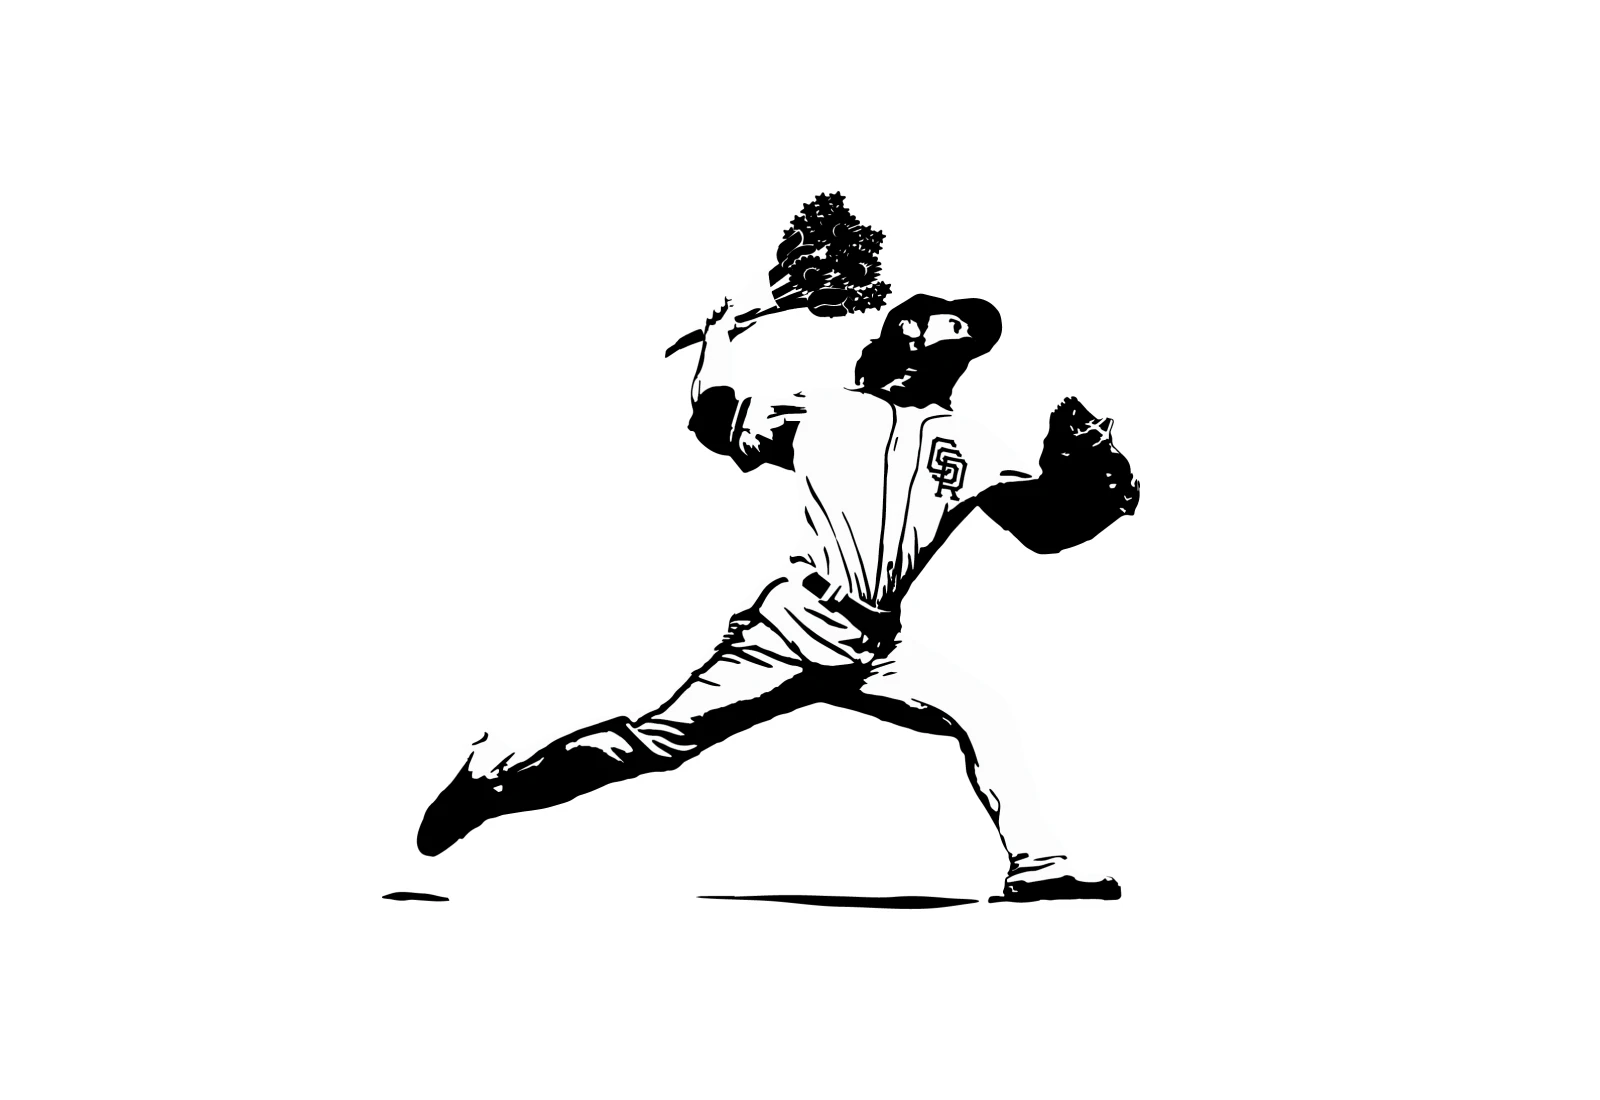 Banksy-inspired stencil of Tim Lincecum throwing a bouquet of flowers